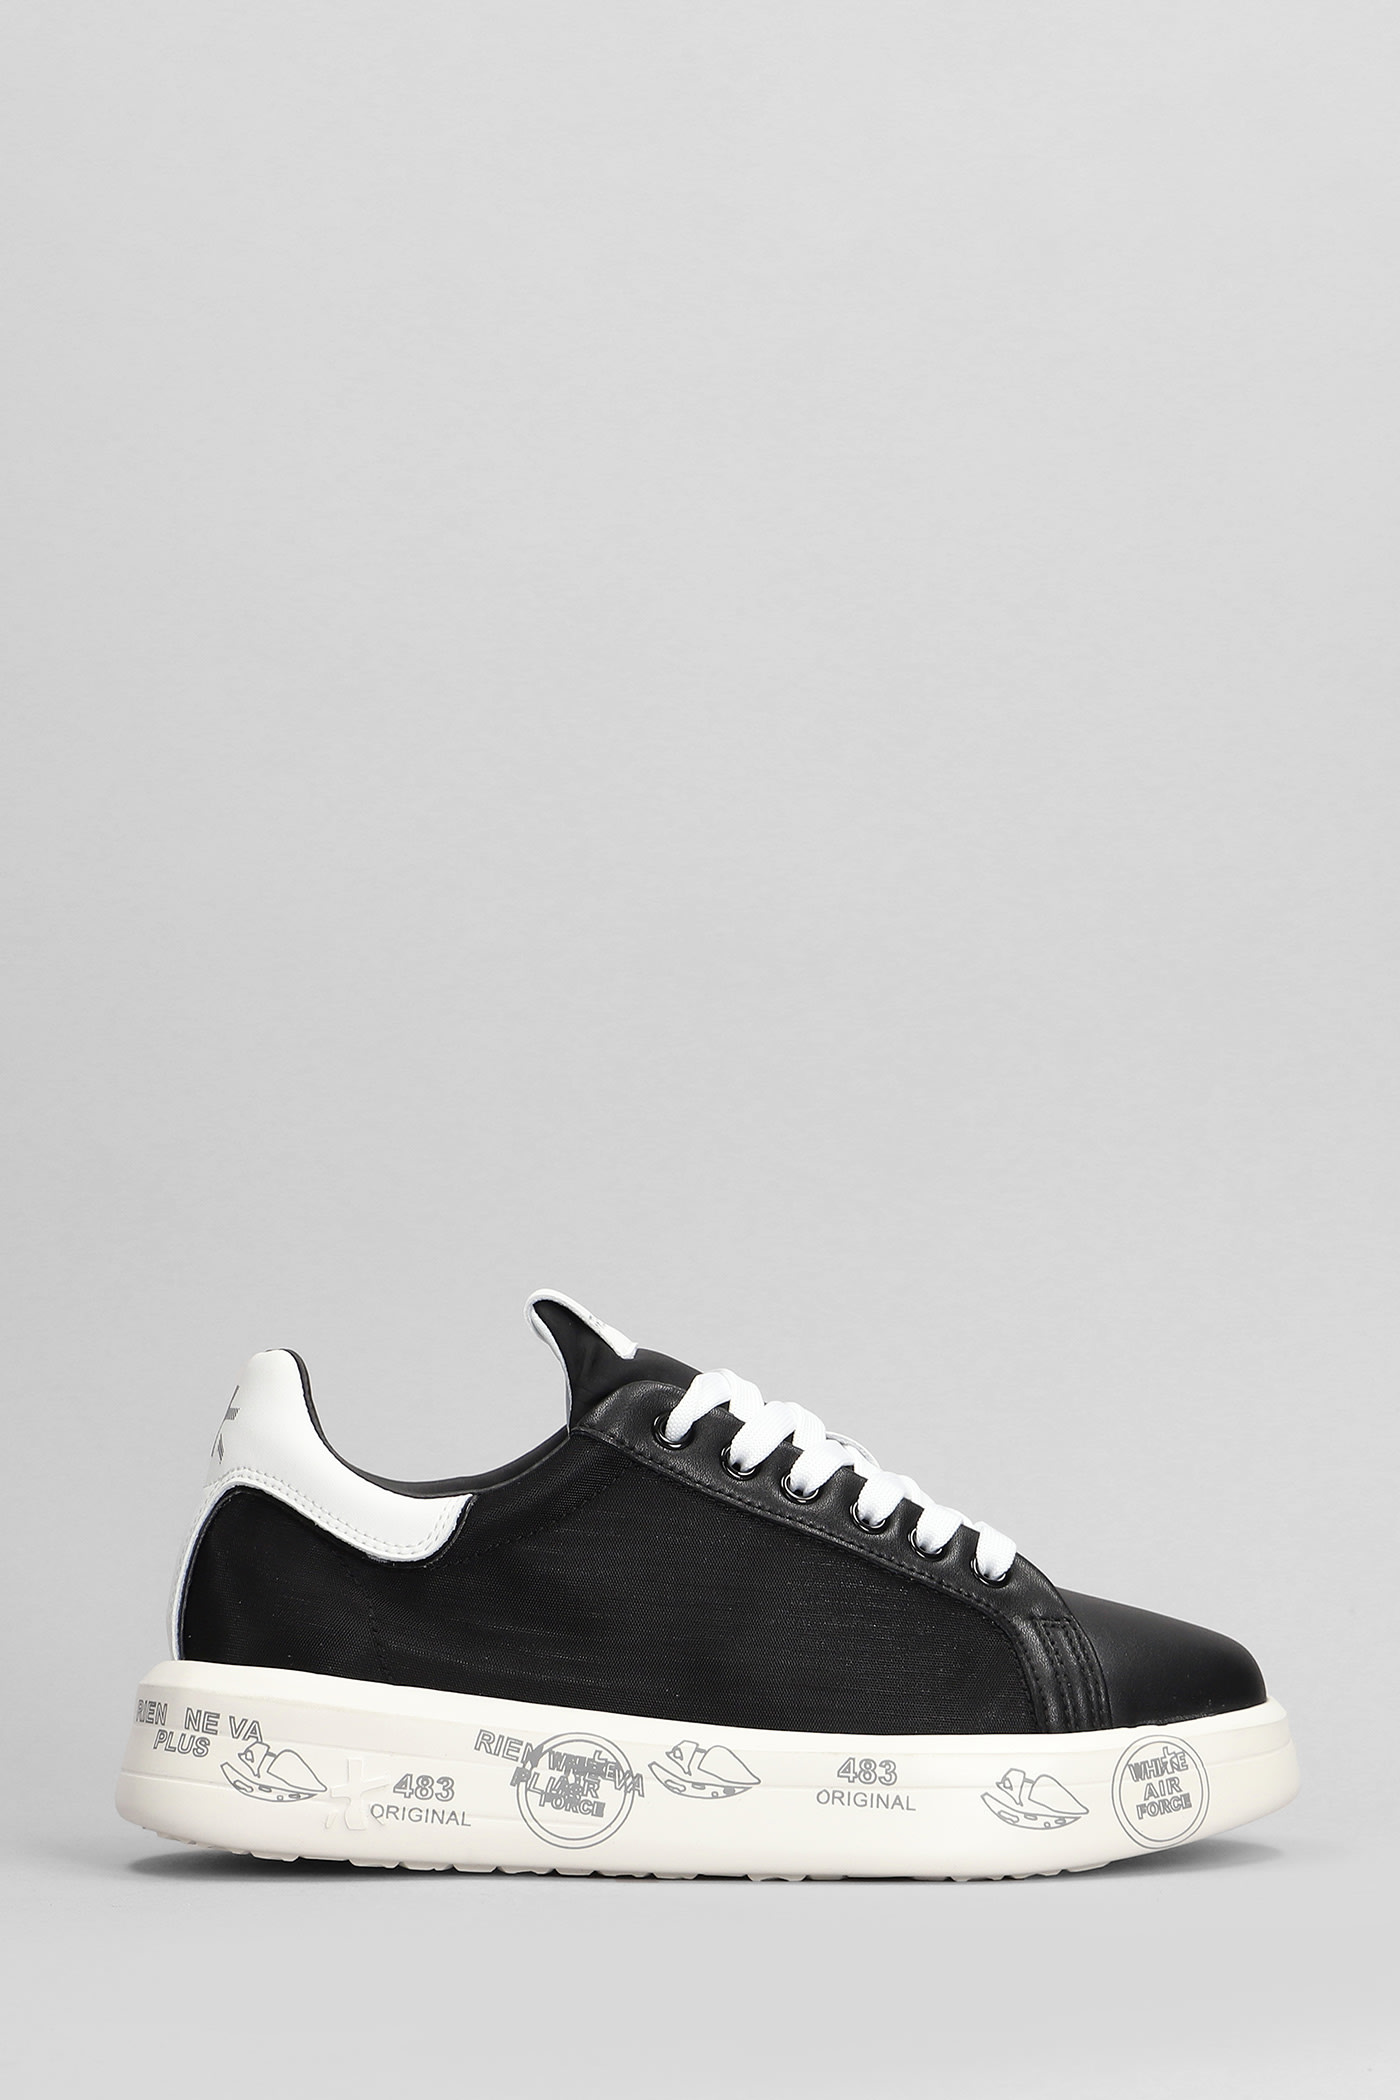 Premiata Belle Sneakers In Black Leather And Fabric